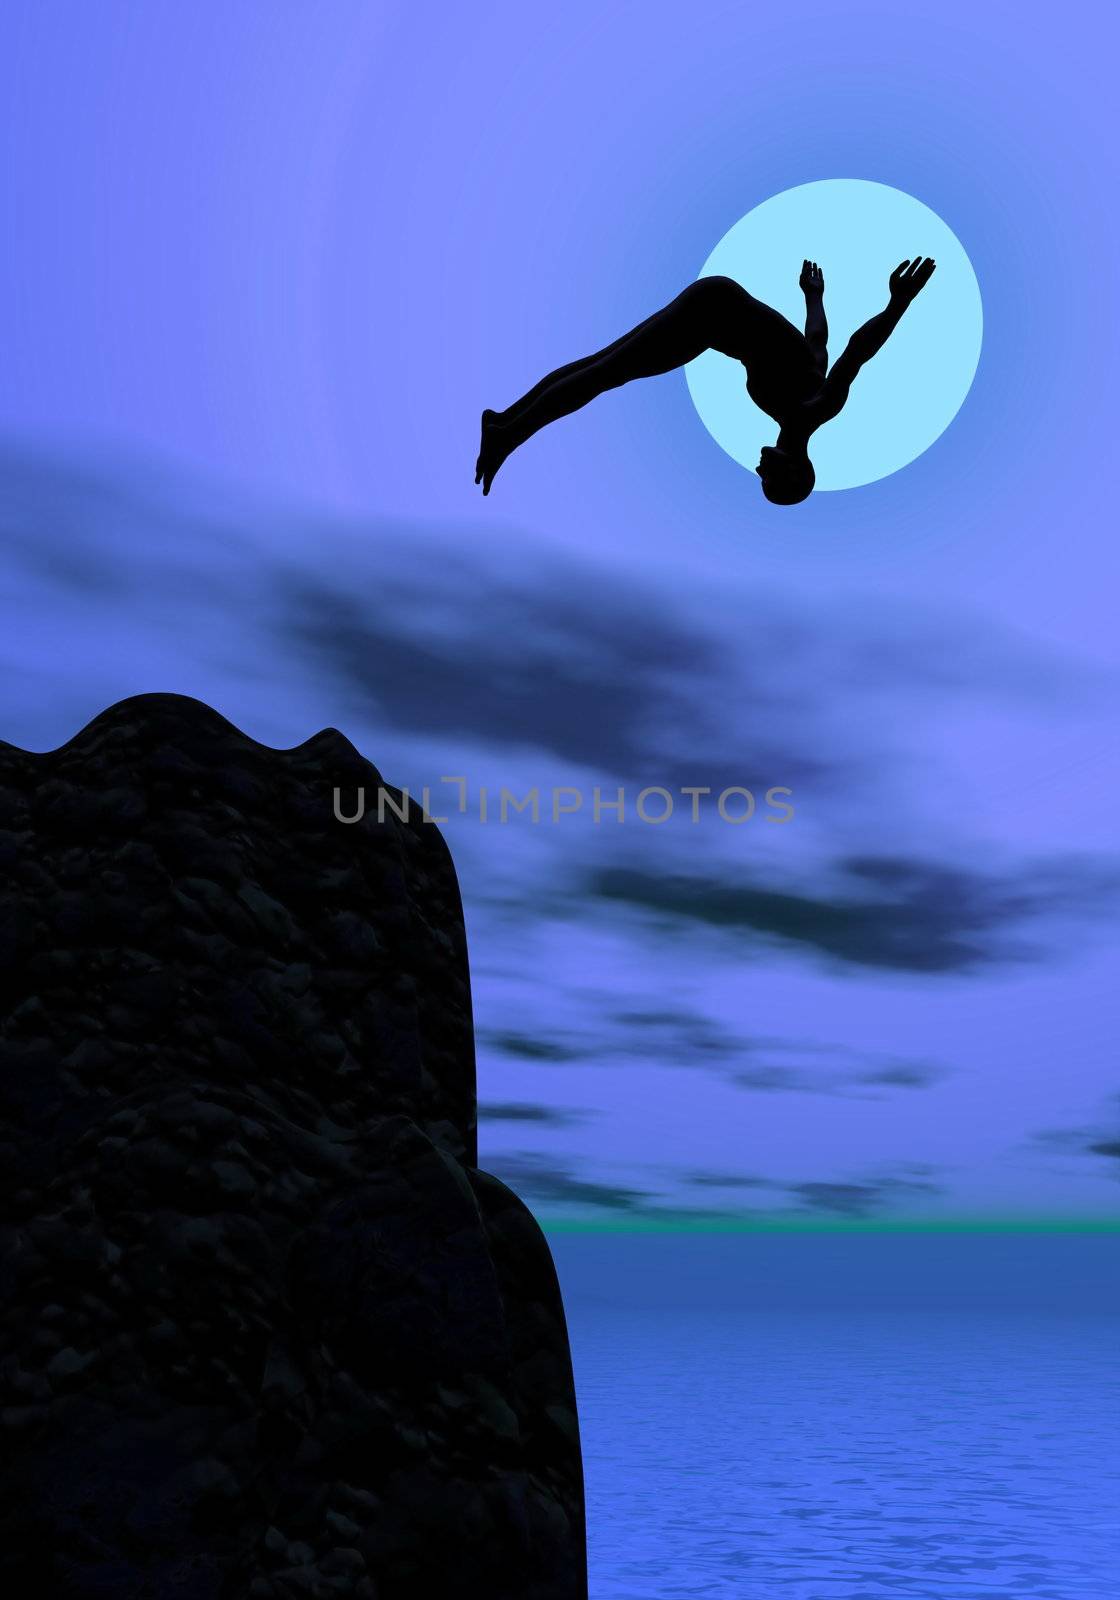 Man diving from the top of a rocky mountain by night with full moon